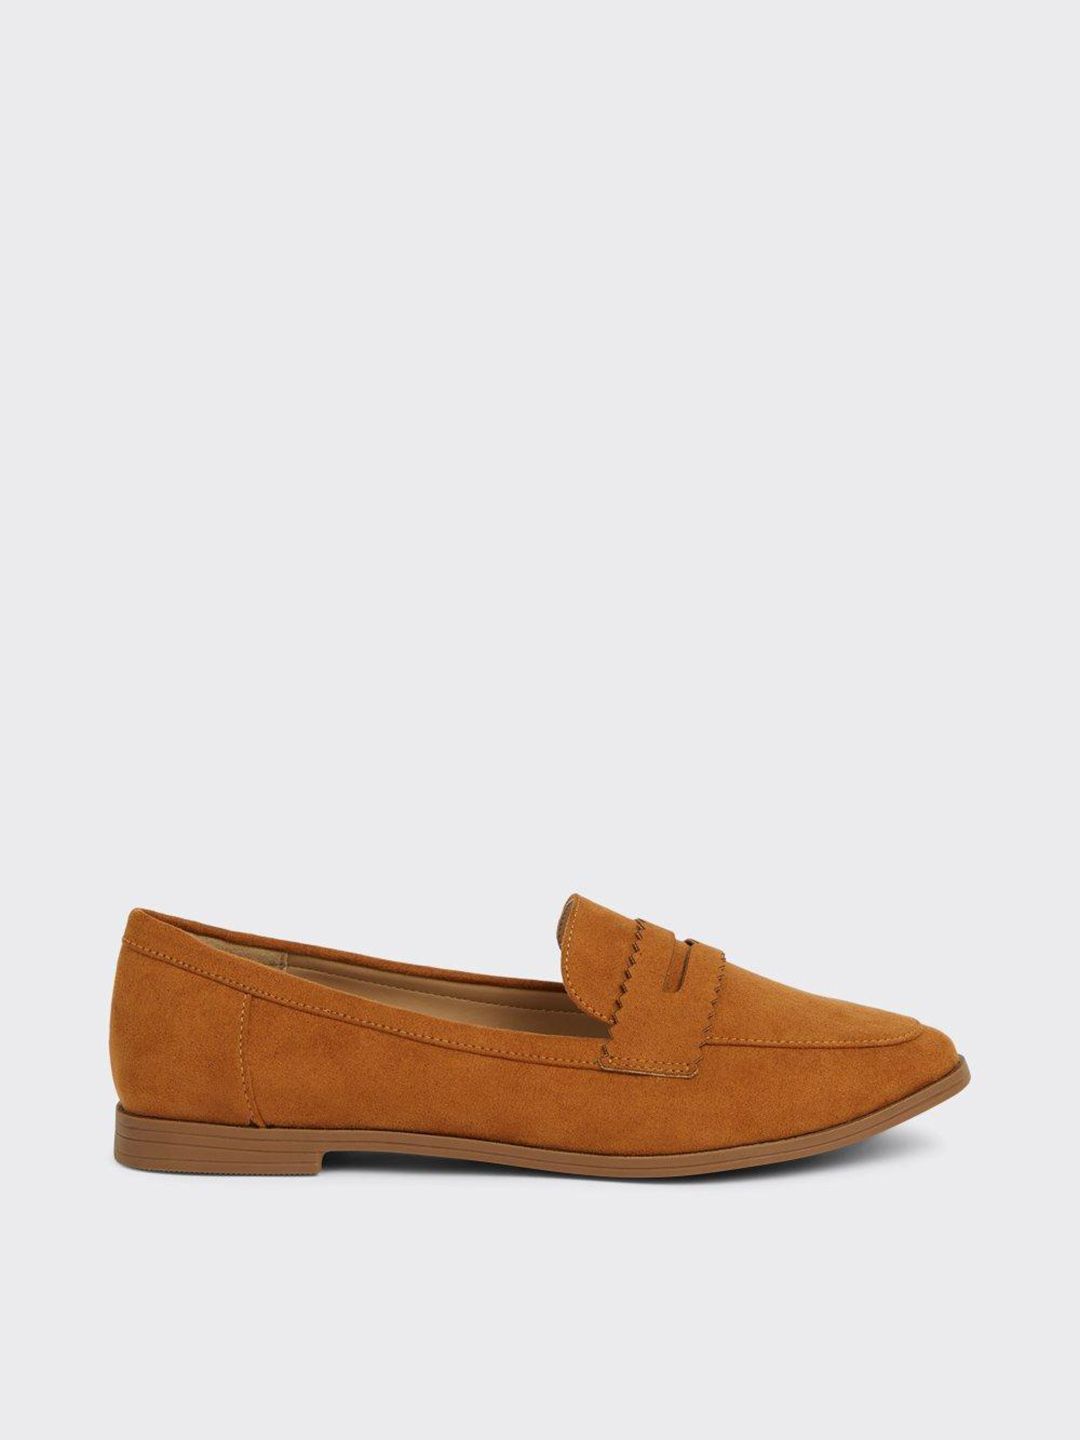 DOROTHY PERKINS Women Brown Loafers Price in India